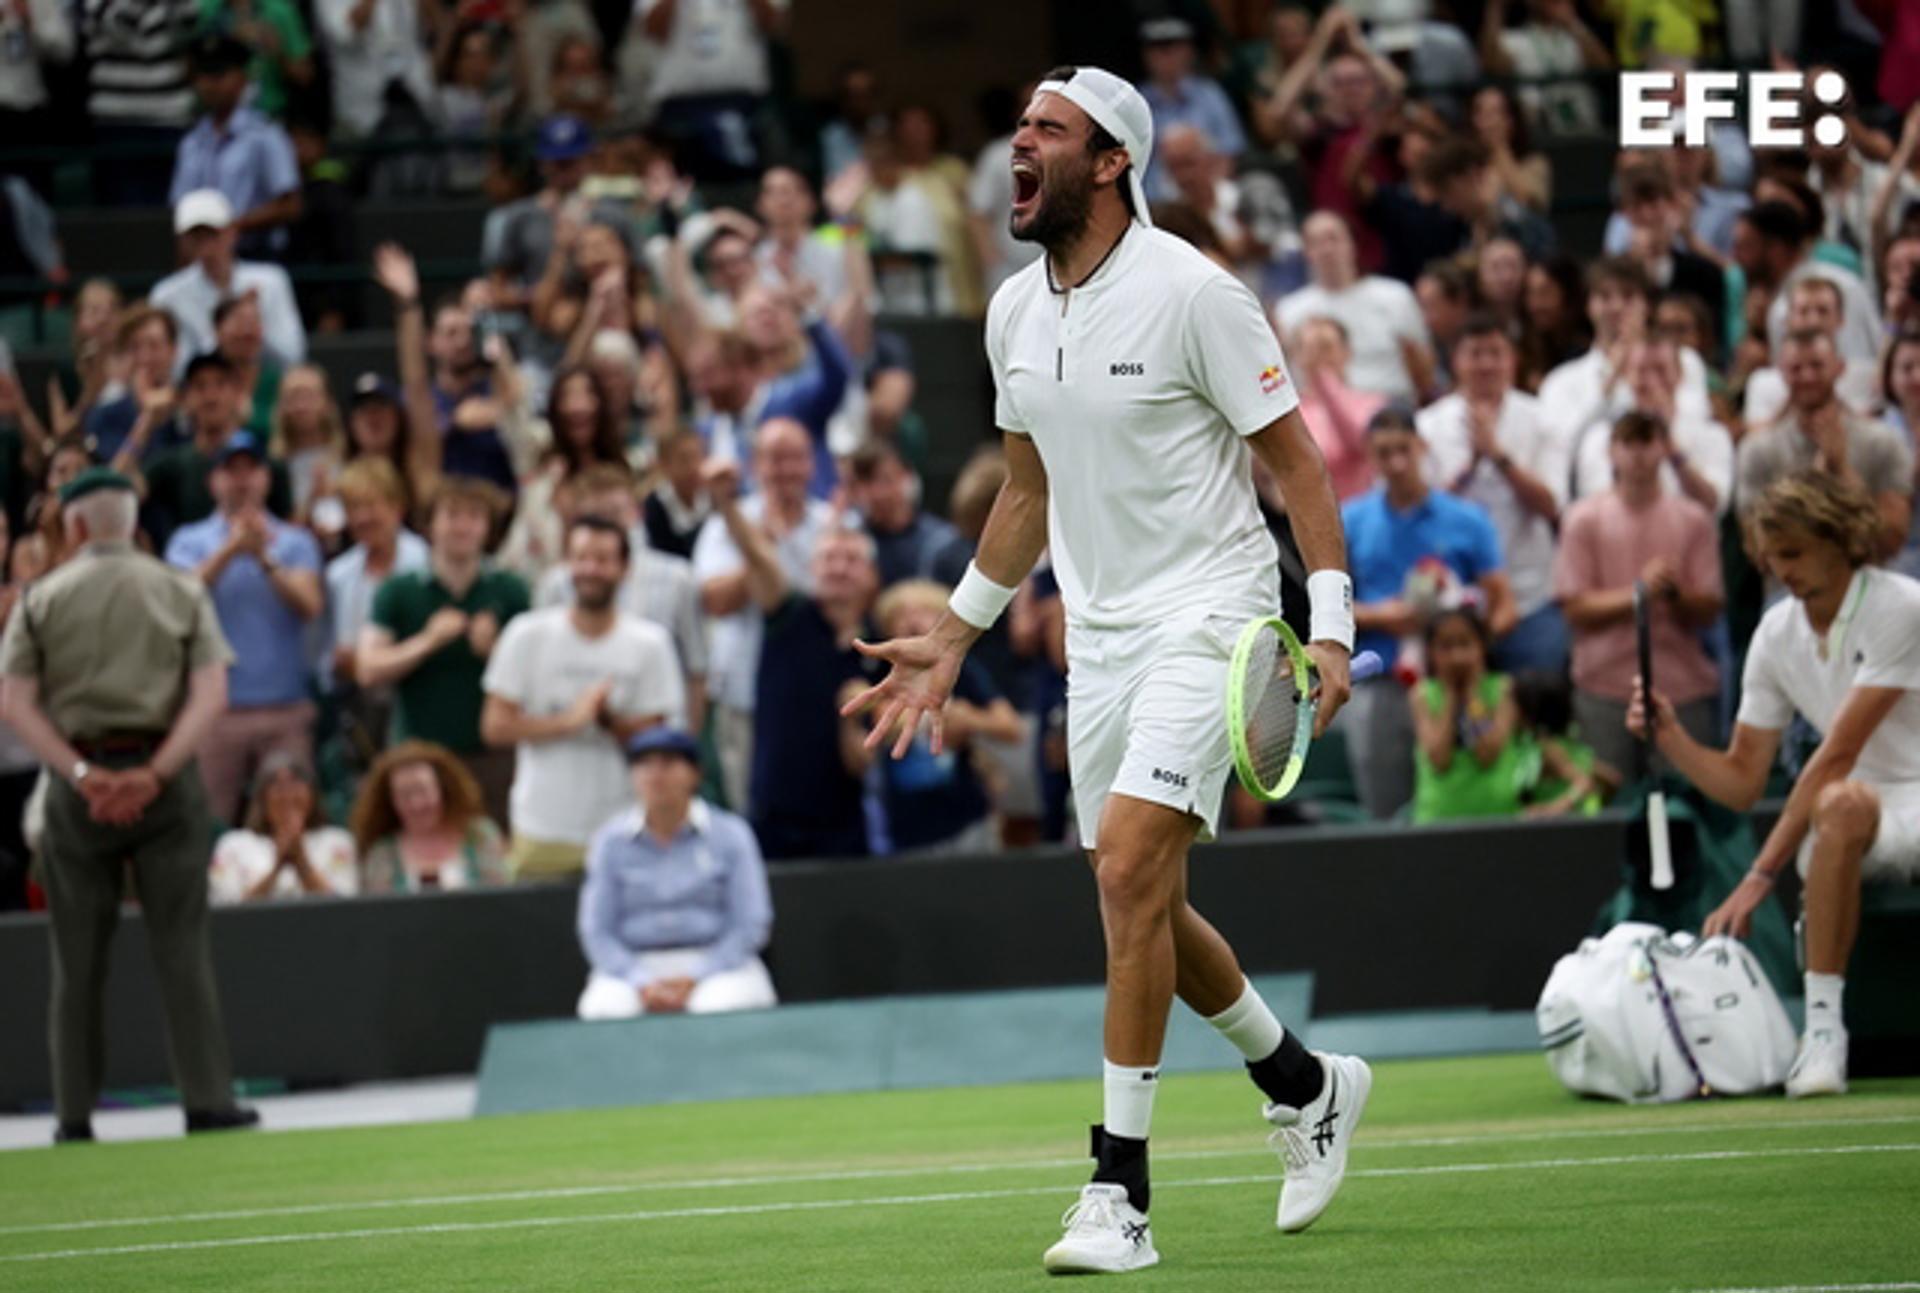 Matteo Berrettini celebrates after defeating Alexander Zverev in their third round match at the Wimbledon Championships in London on 8 July 2023. EFE/EPA/ISABEL INFANTES/EDITORIAL USE ONLY
